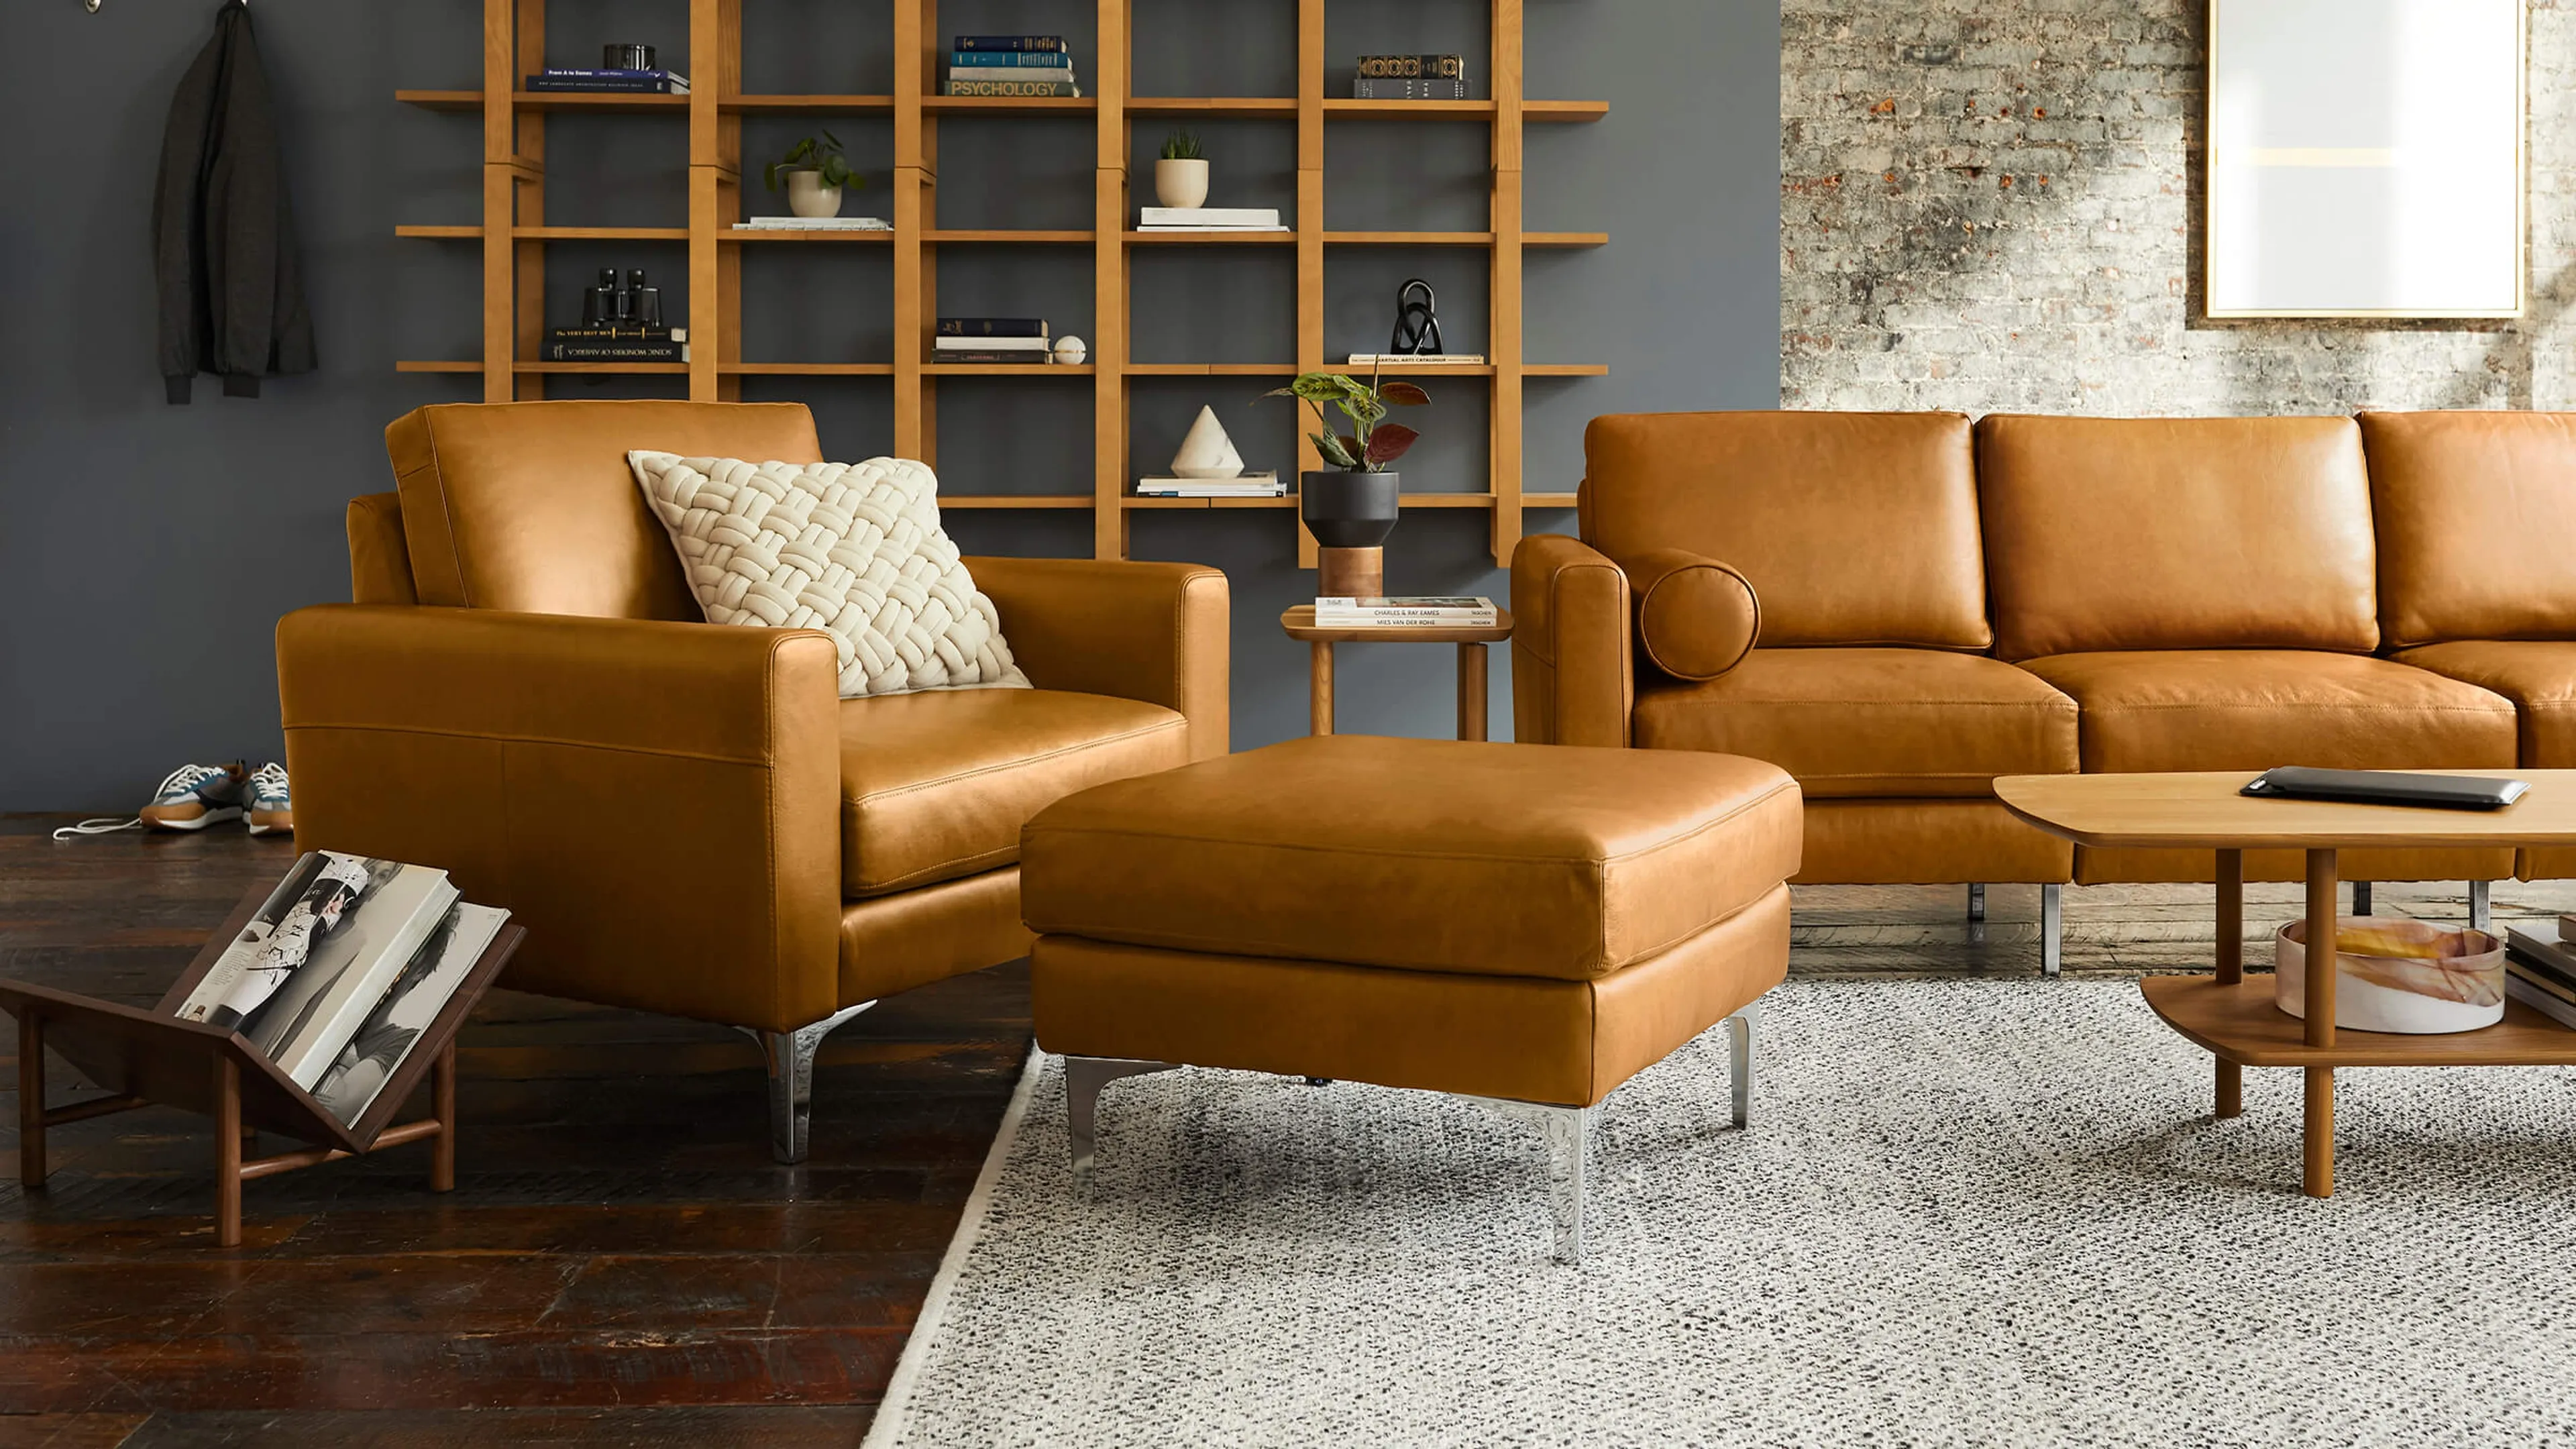 Original Nomad Armchair with Ottoman in Chestnut Leather